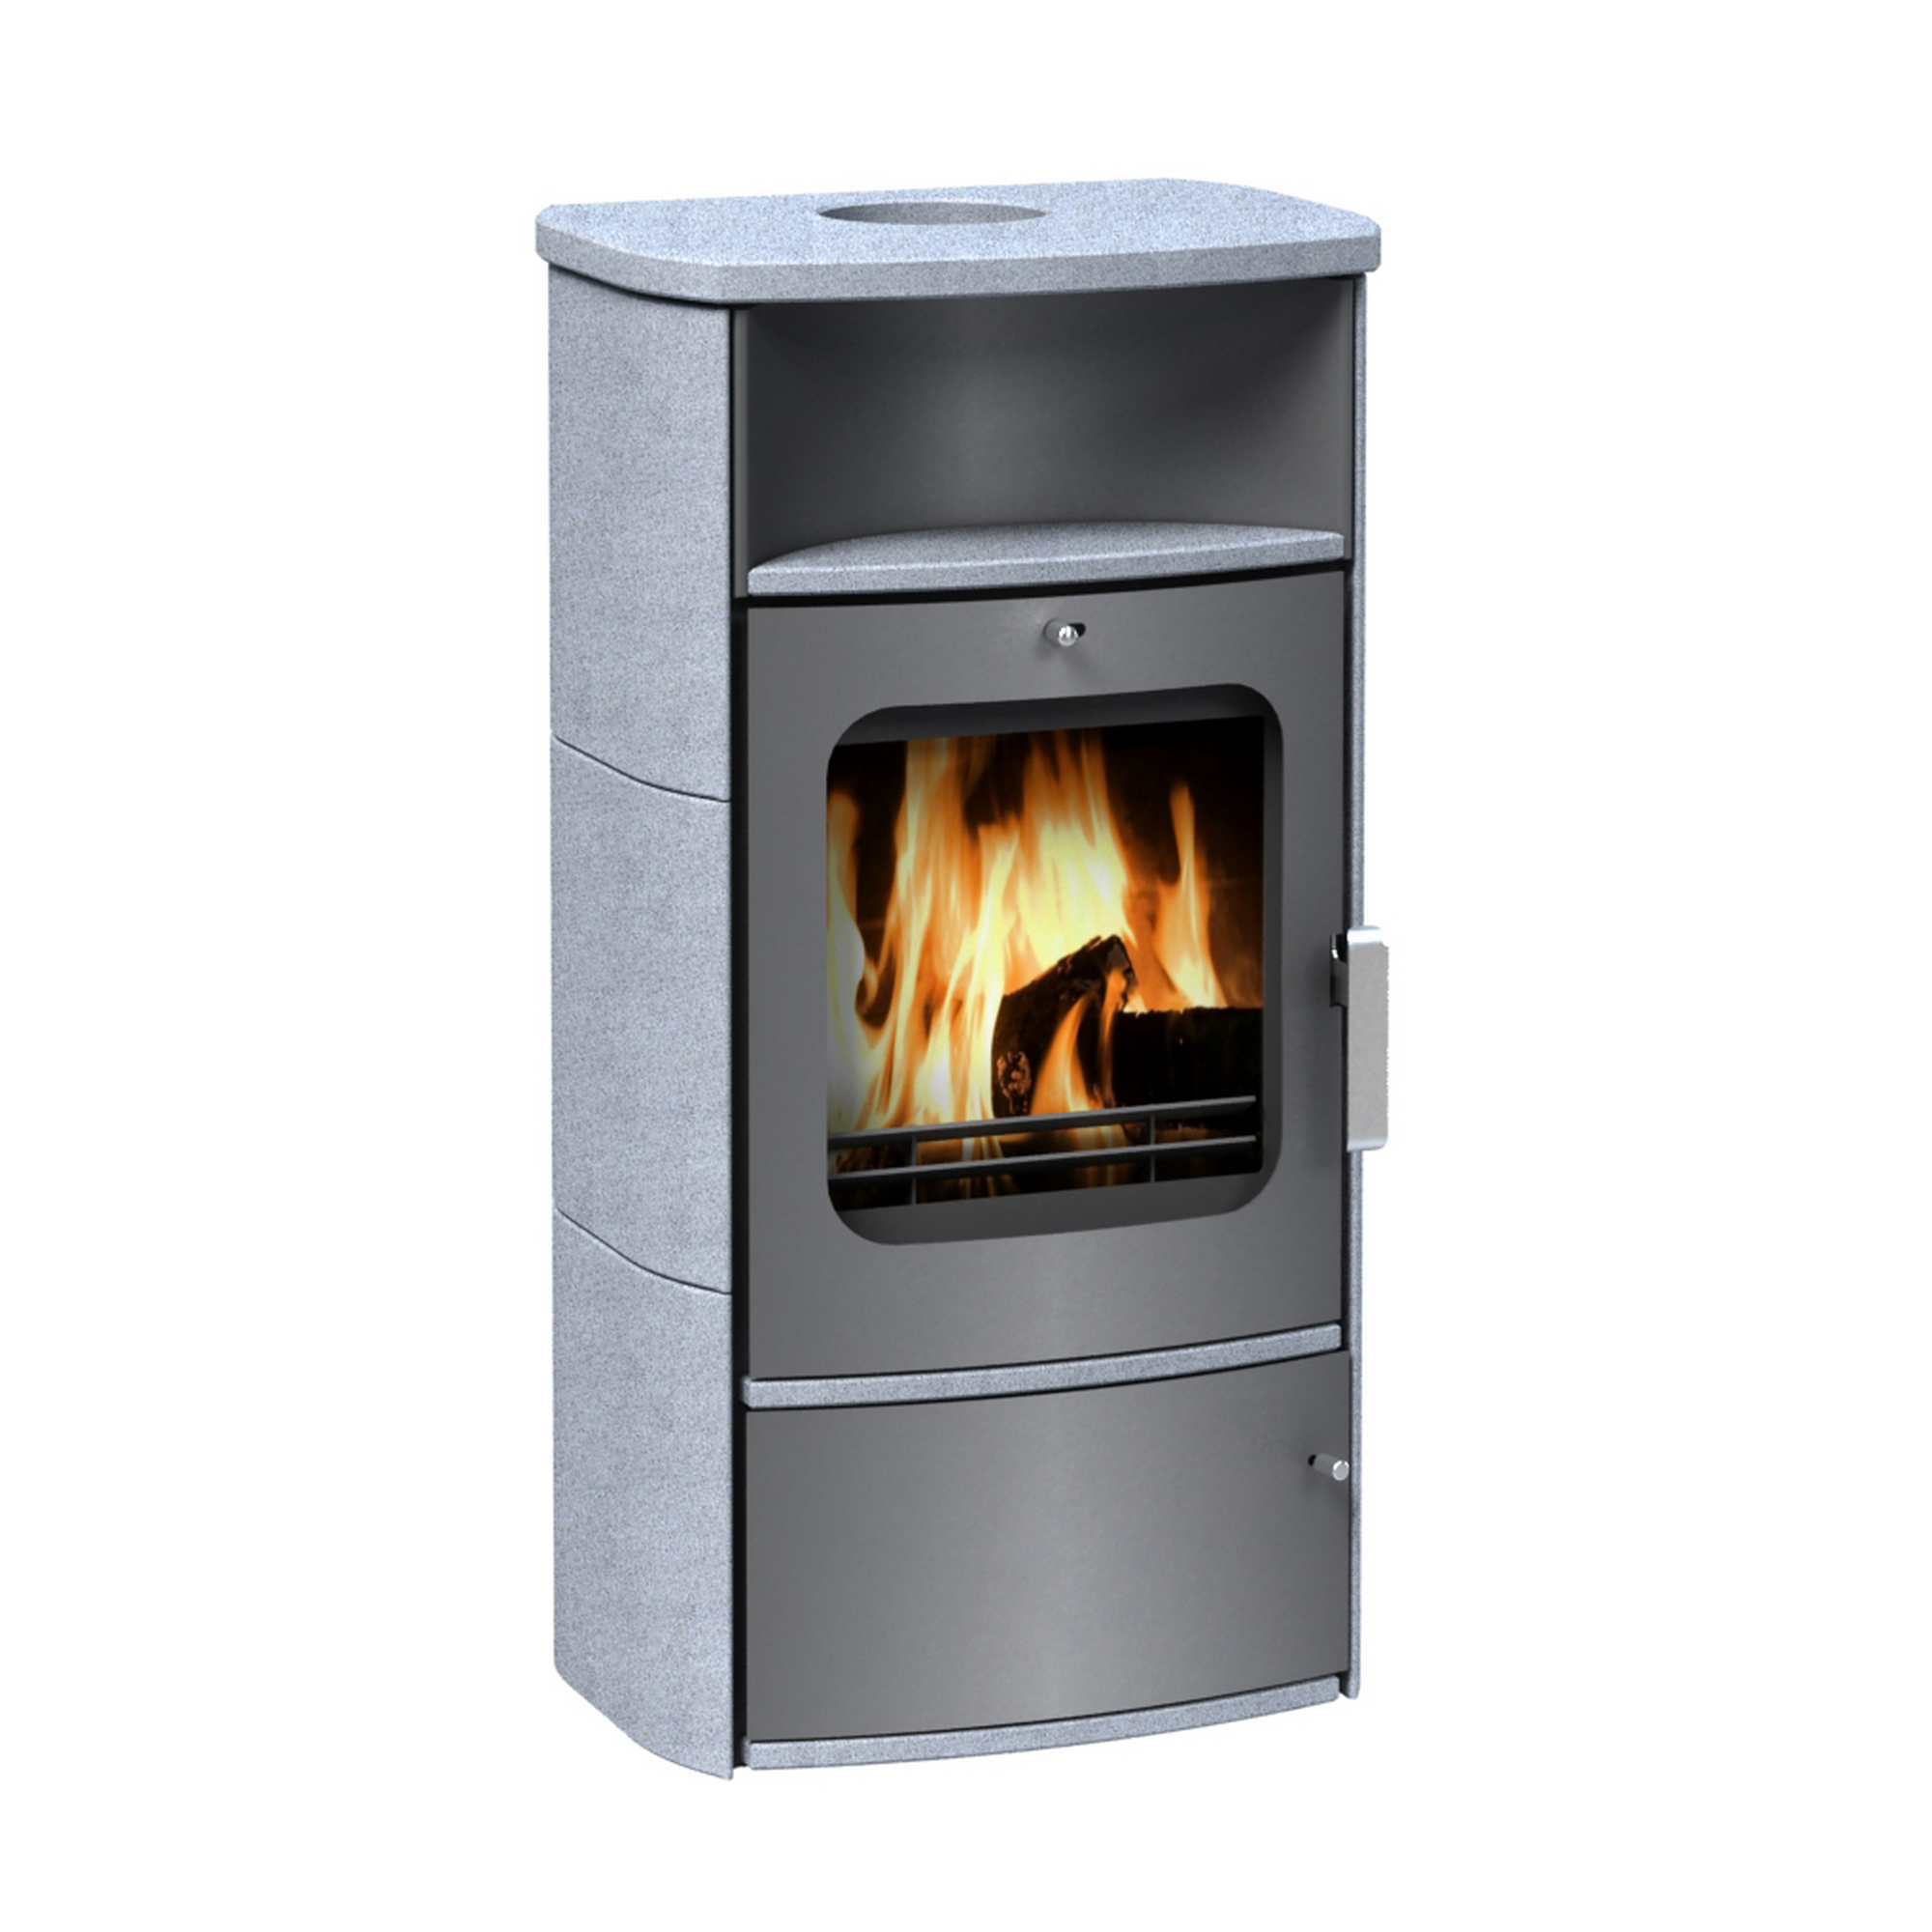 Kaminofen 'Montreal 2.0 GTS' anthrazit/grau 6 kW + product picture